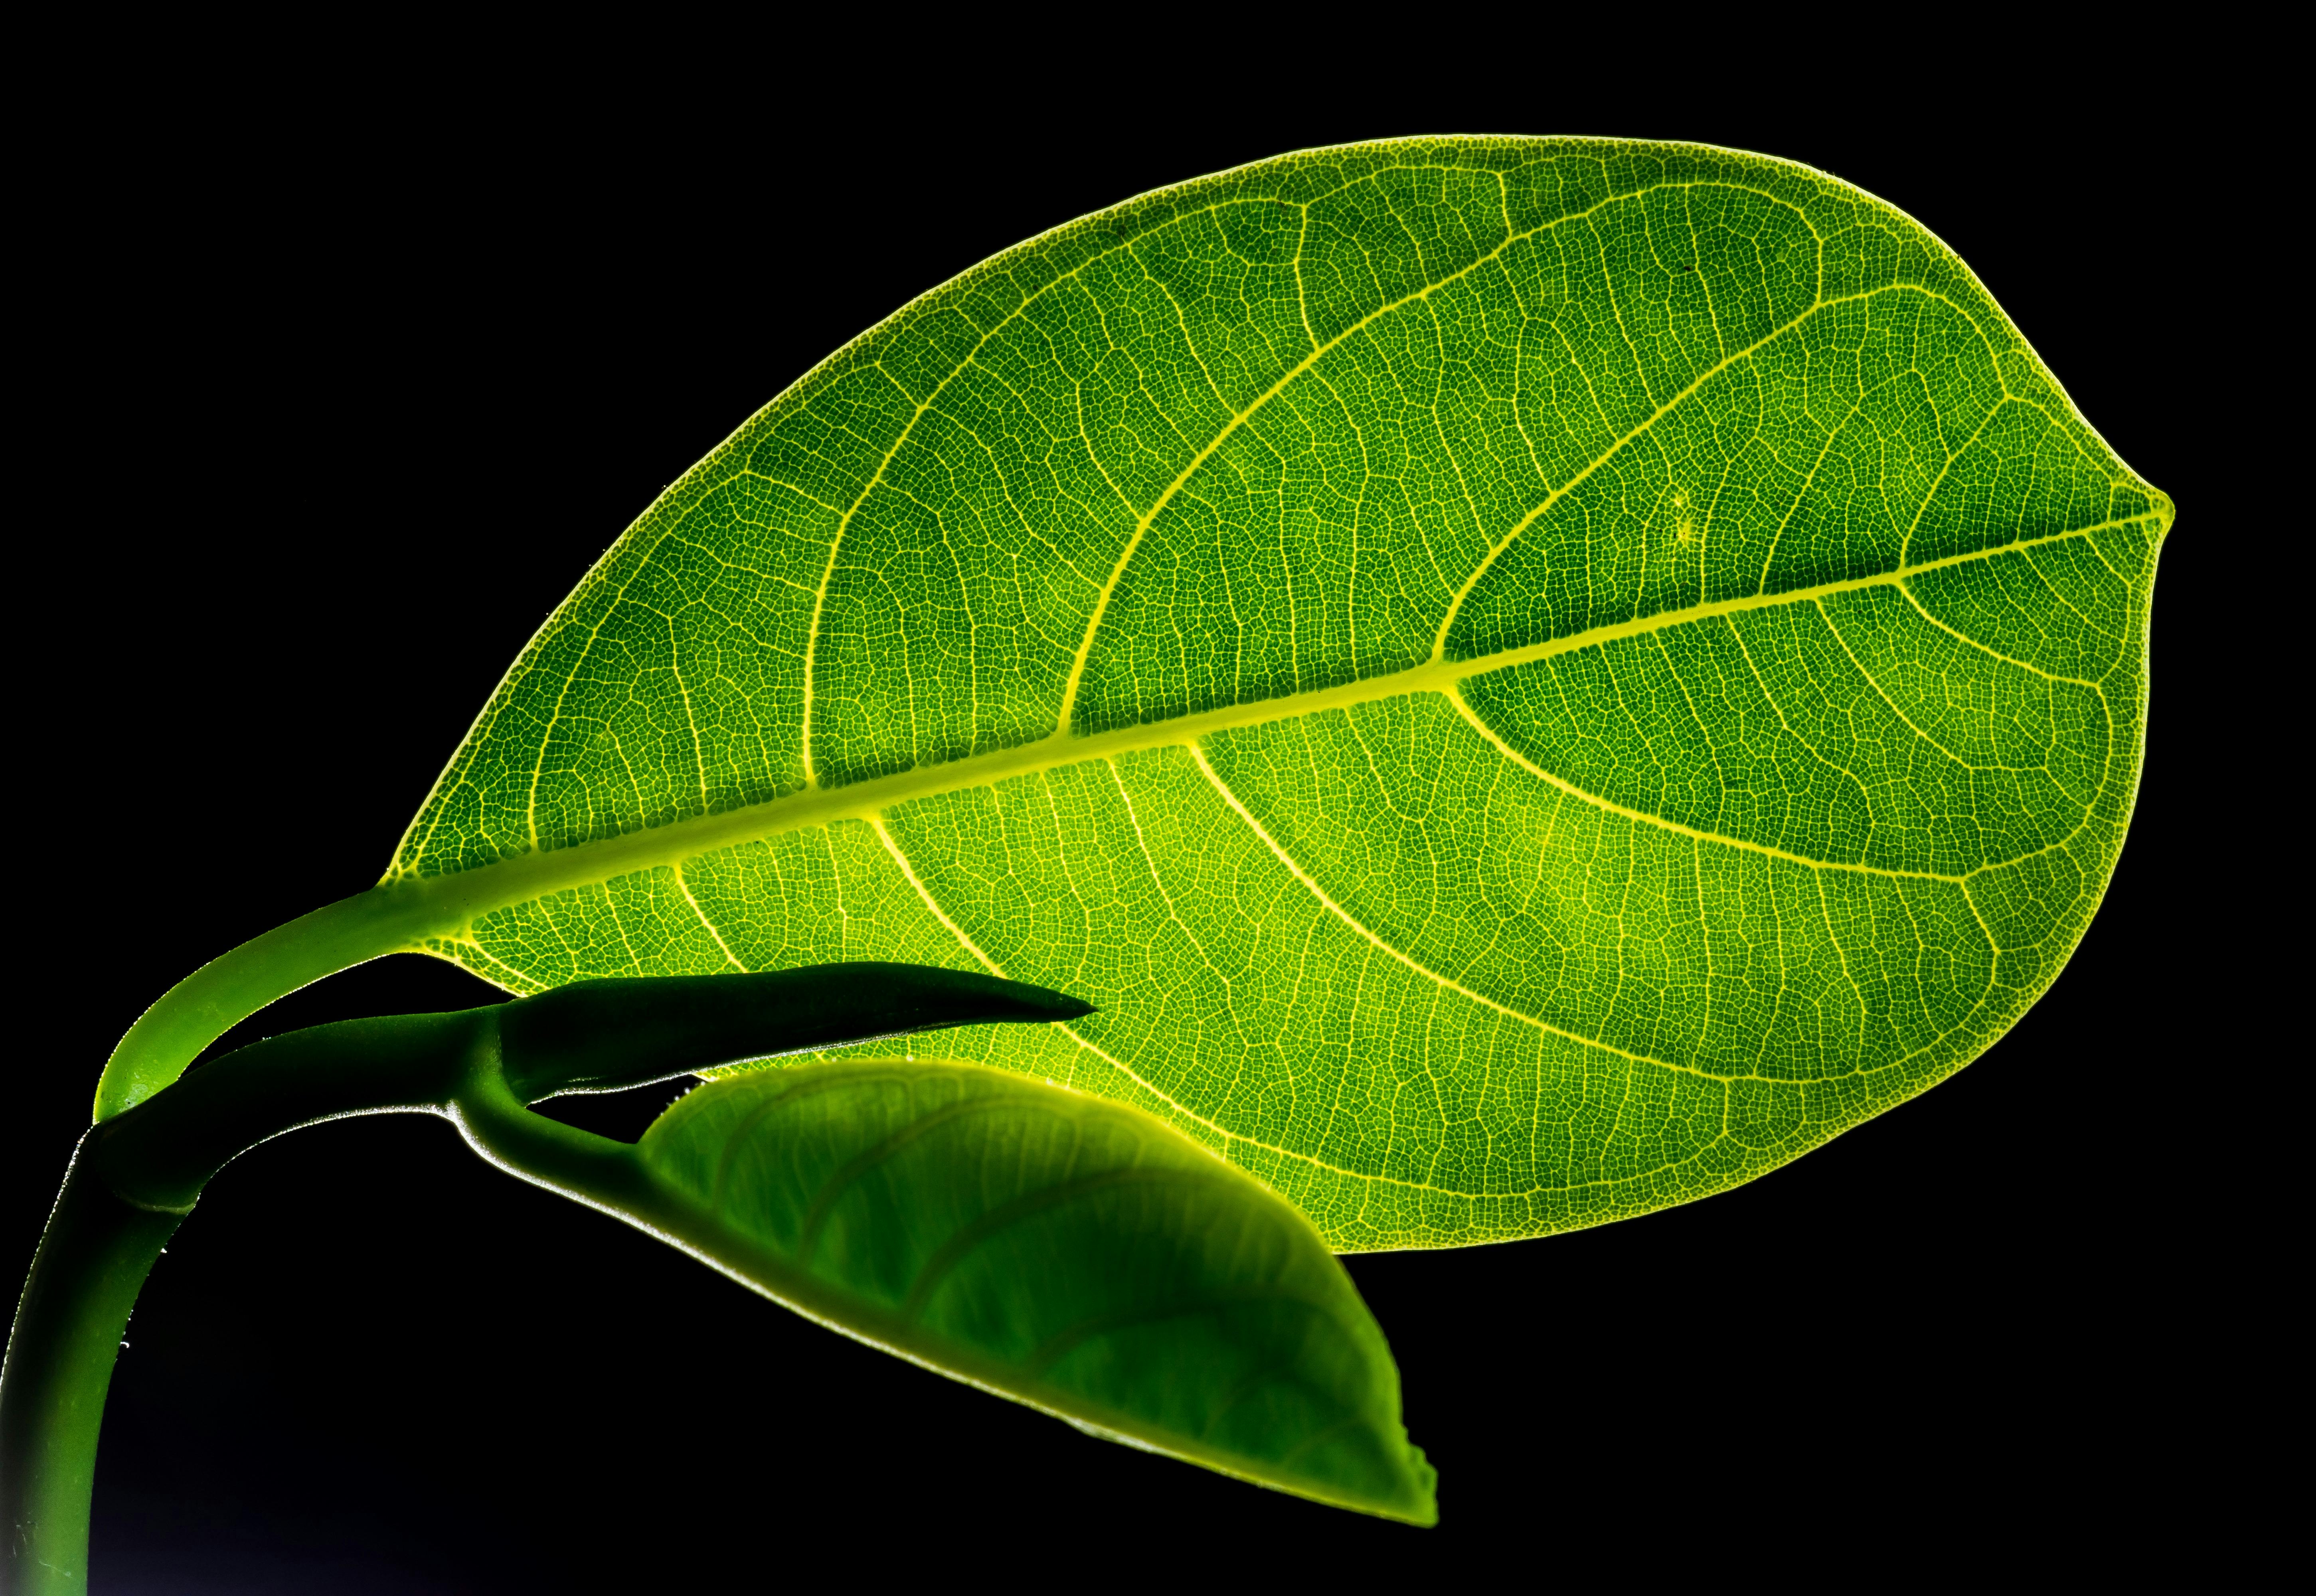 HD wallpaper leaf nature 4k green color plant part growth no people   Wallpaper Flare